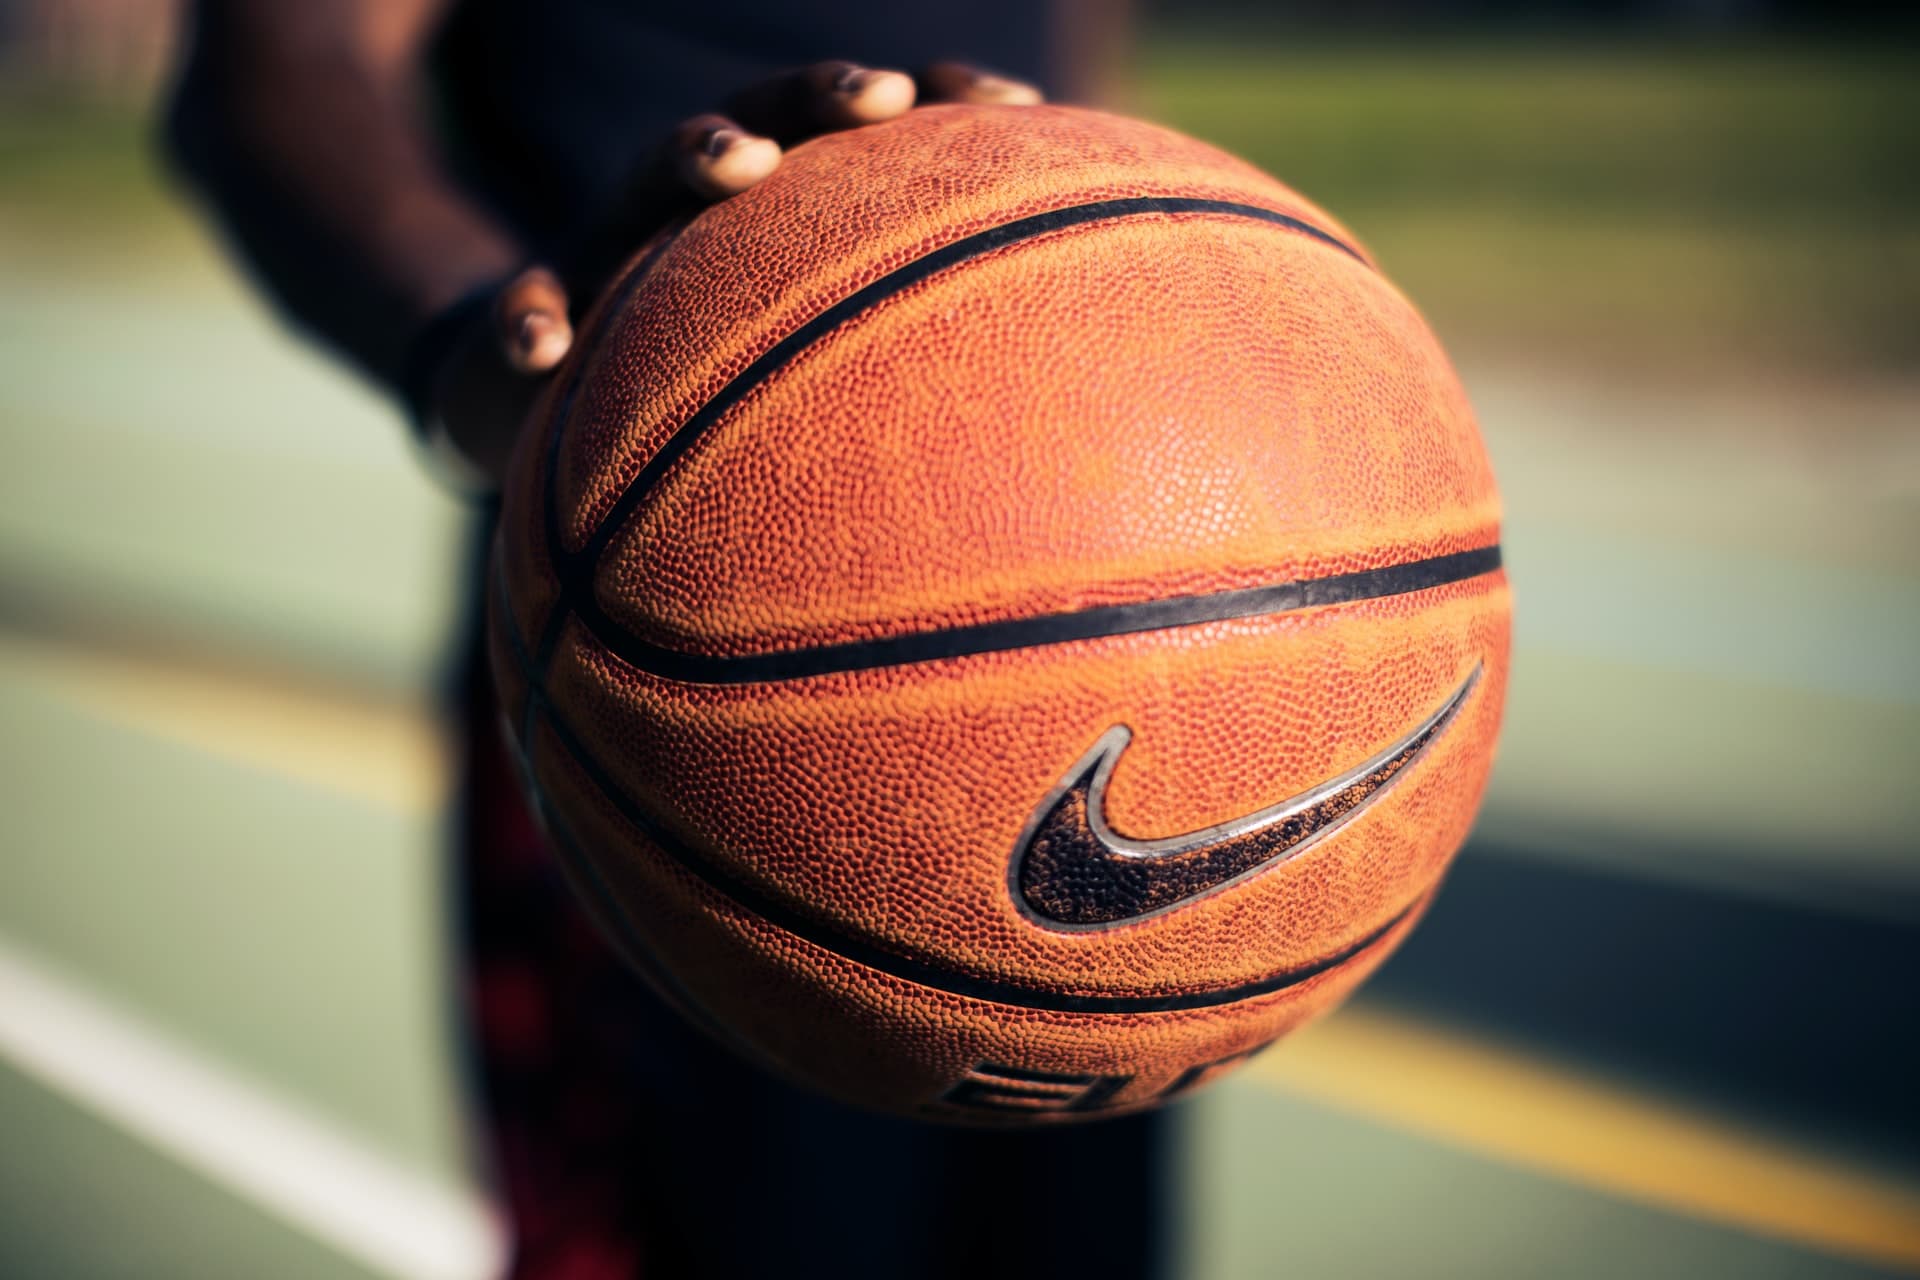 What Makes a Basketball Lose Grip